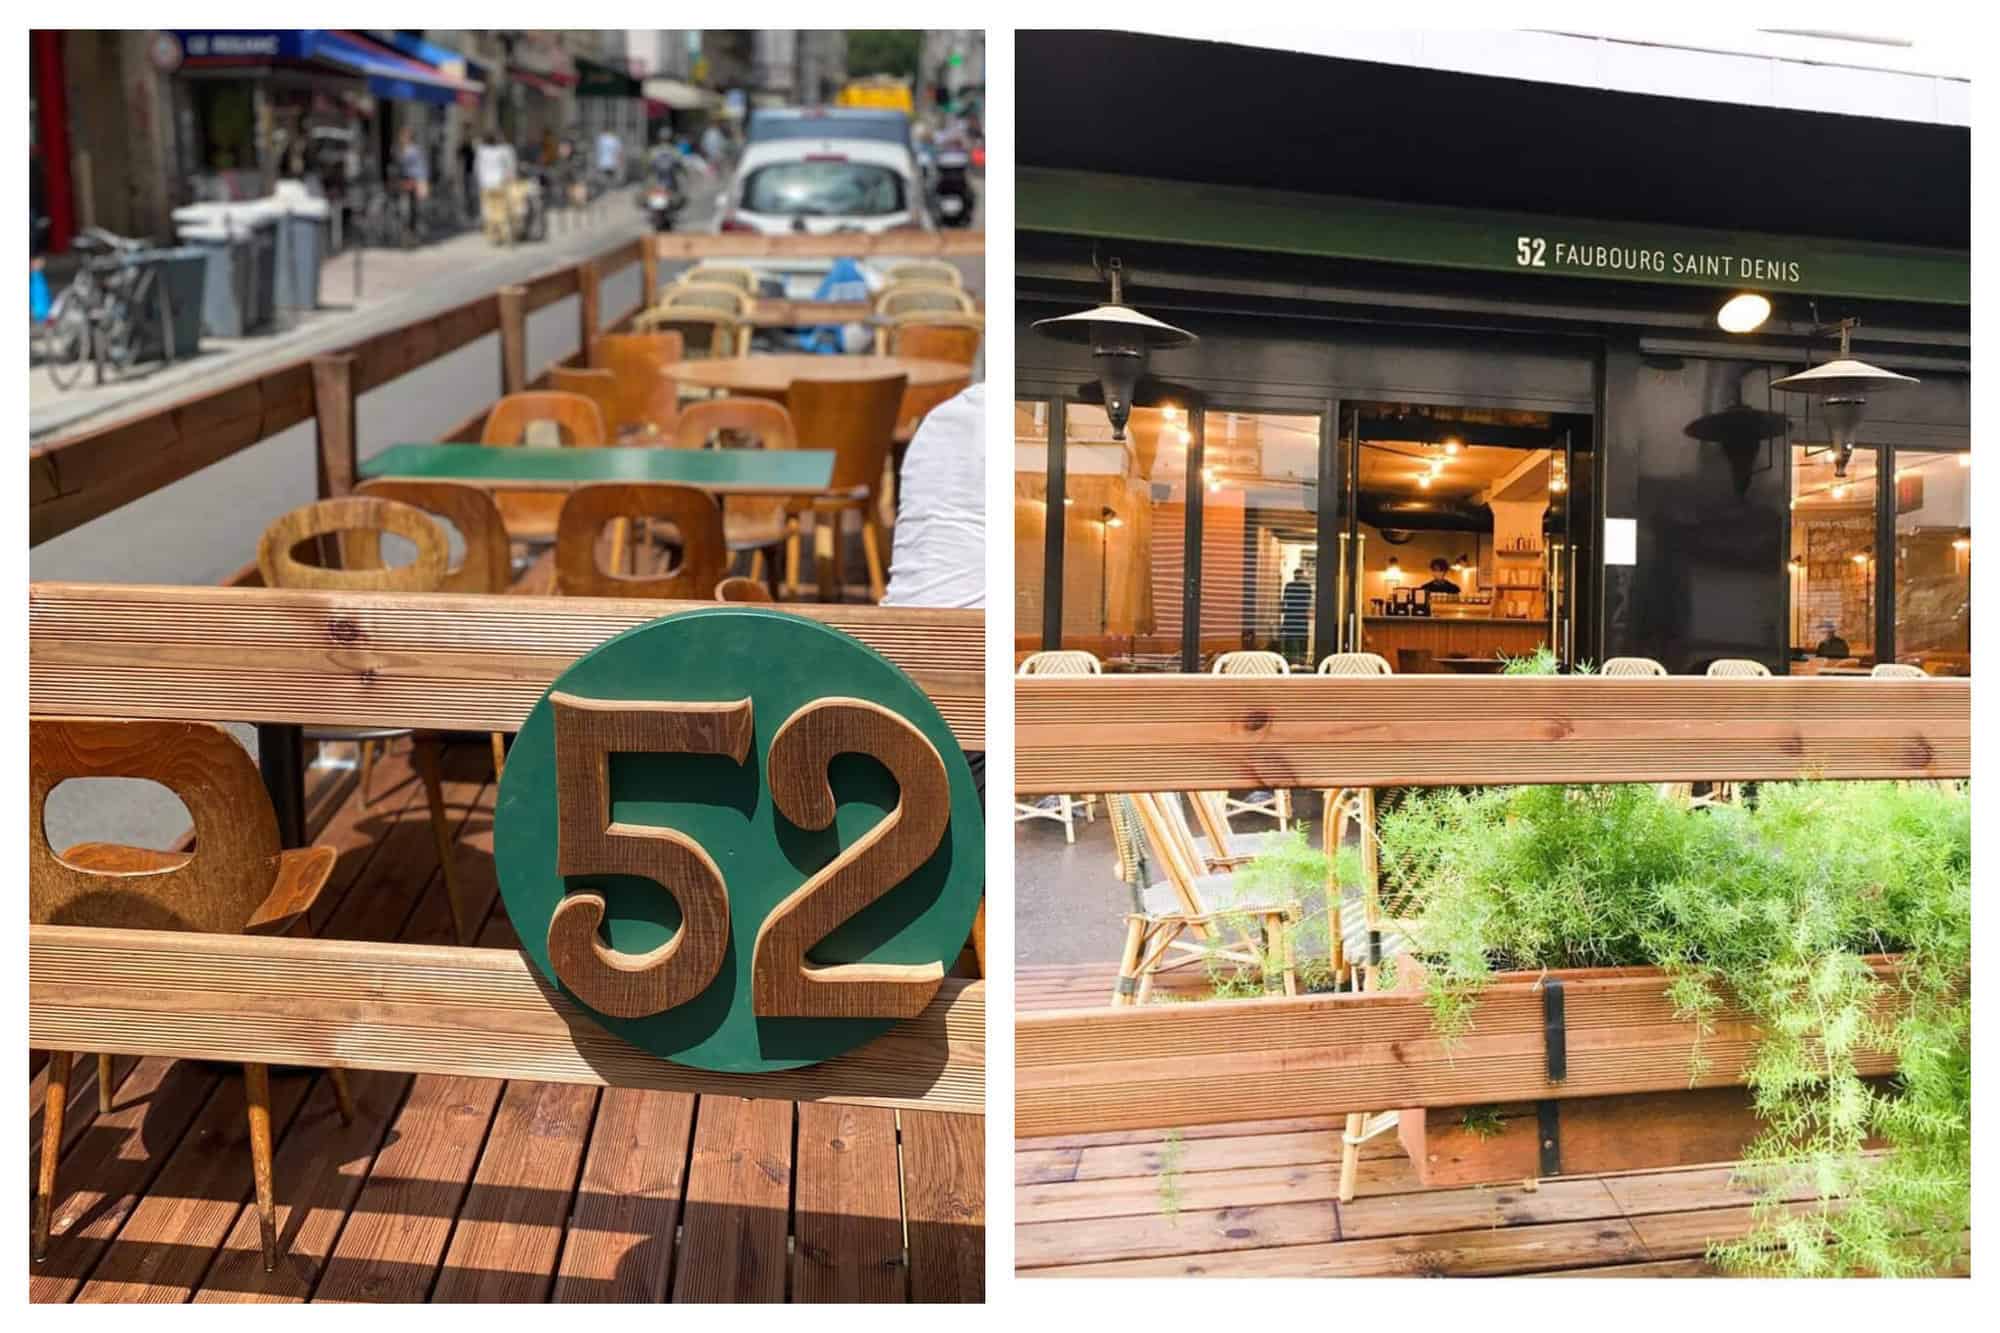 left: the wooden seats in the terrace of Le 52. right: the exterior of le 52